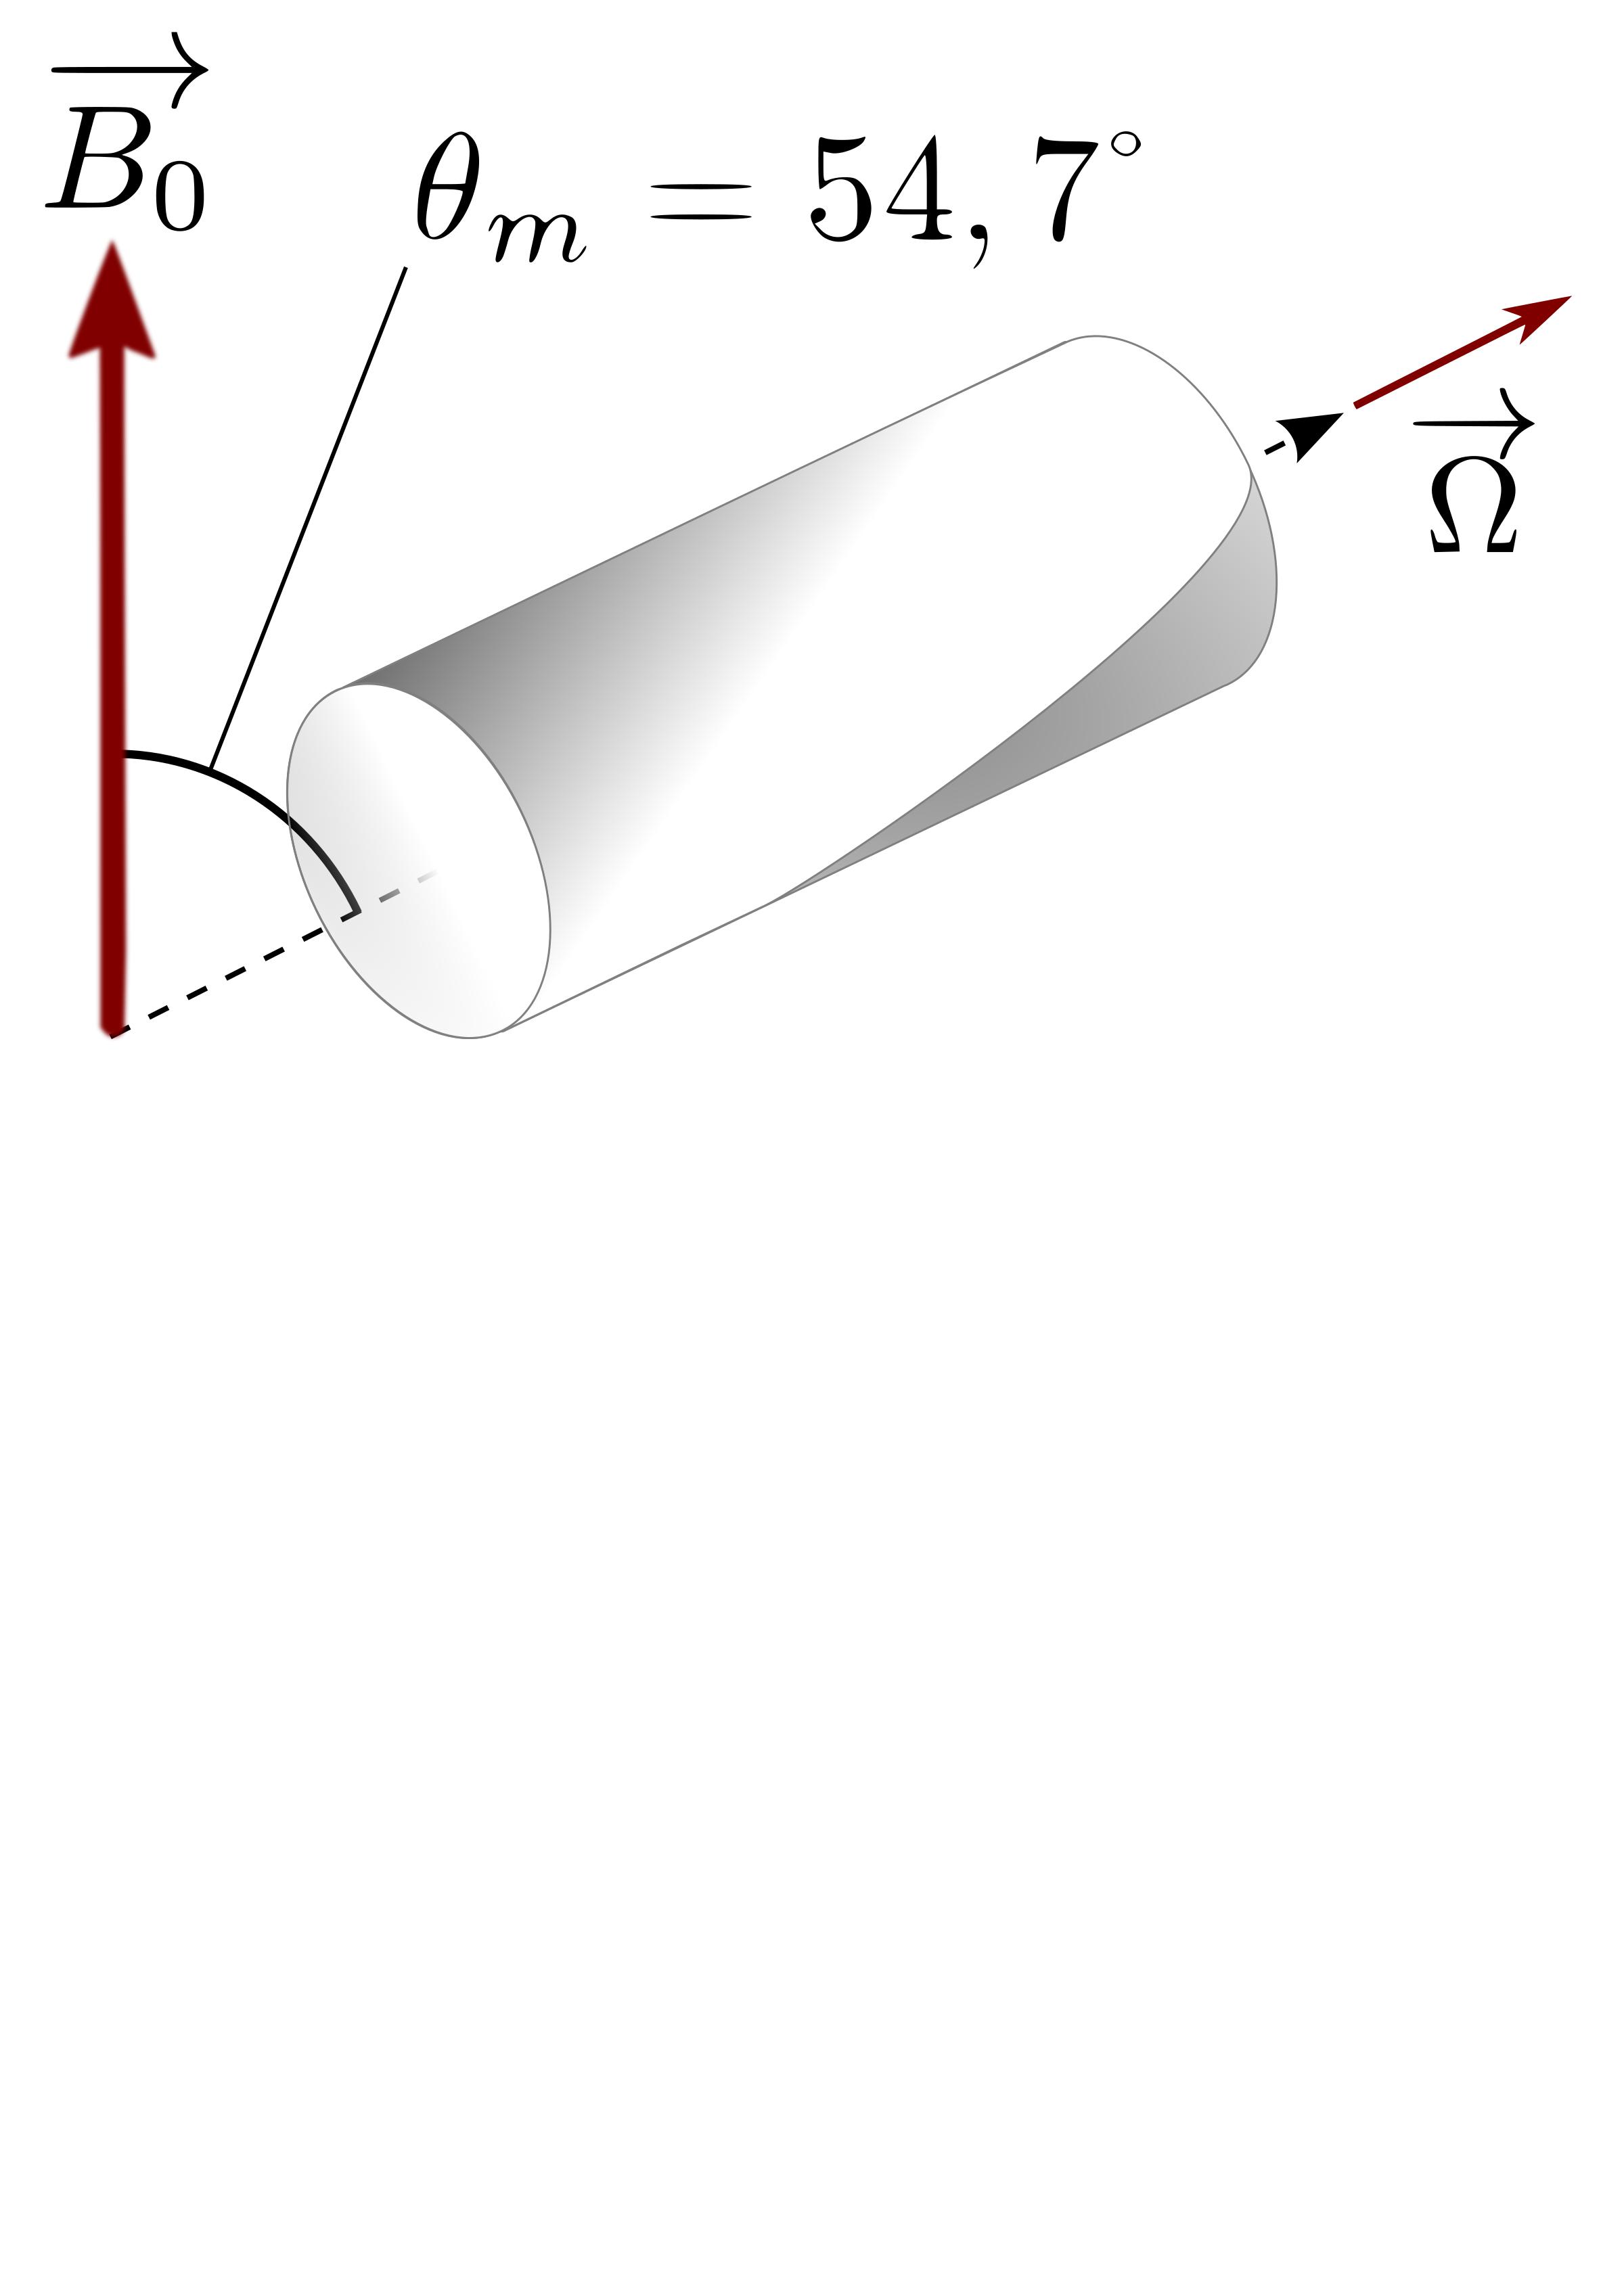 ssNMR spinning rotor png